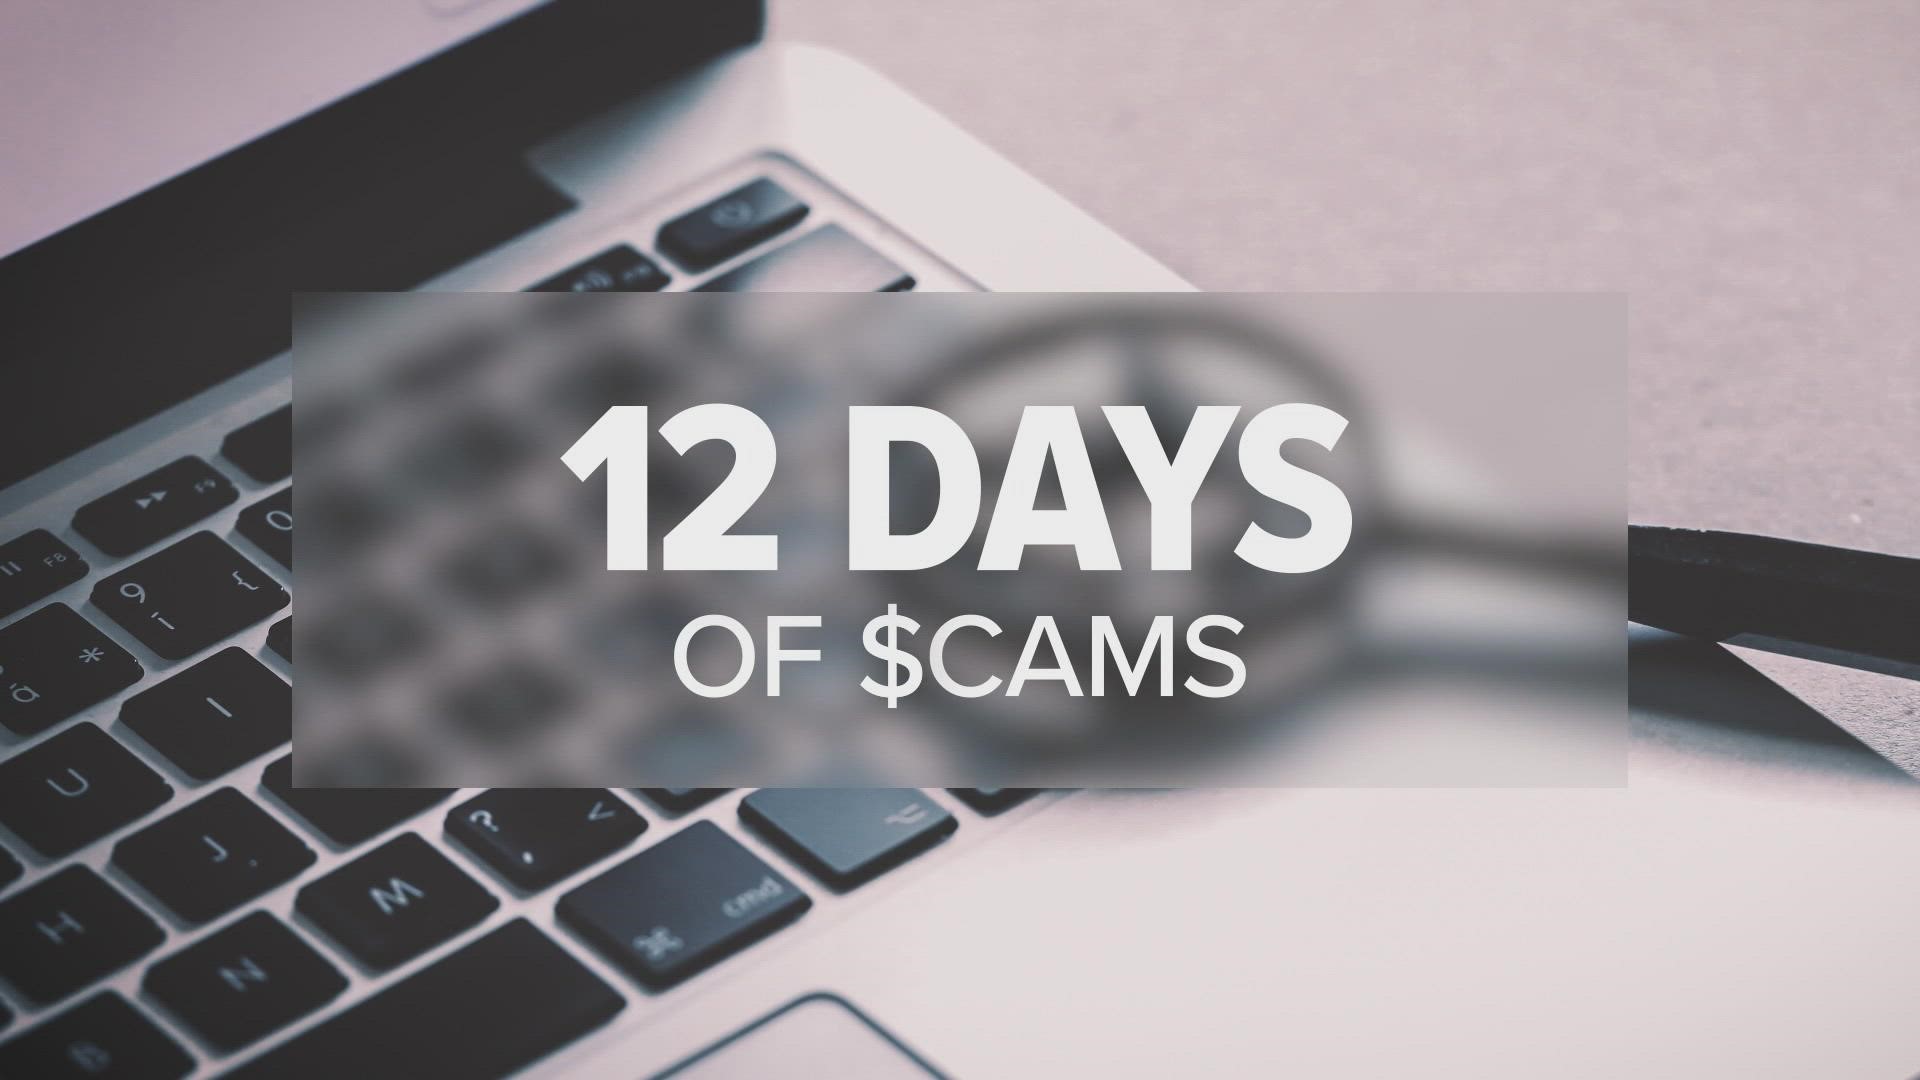 We are bringing you "12 days of Scams" to warn you about the 12 most common things you could see this holiday season.